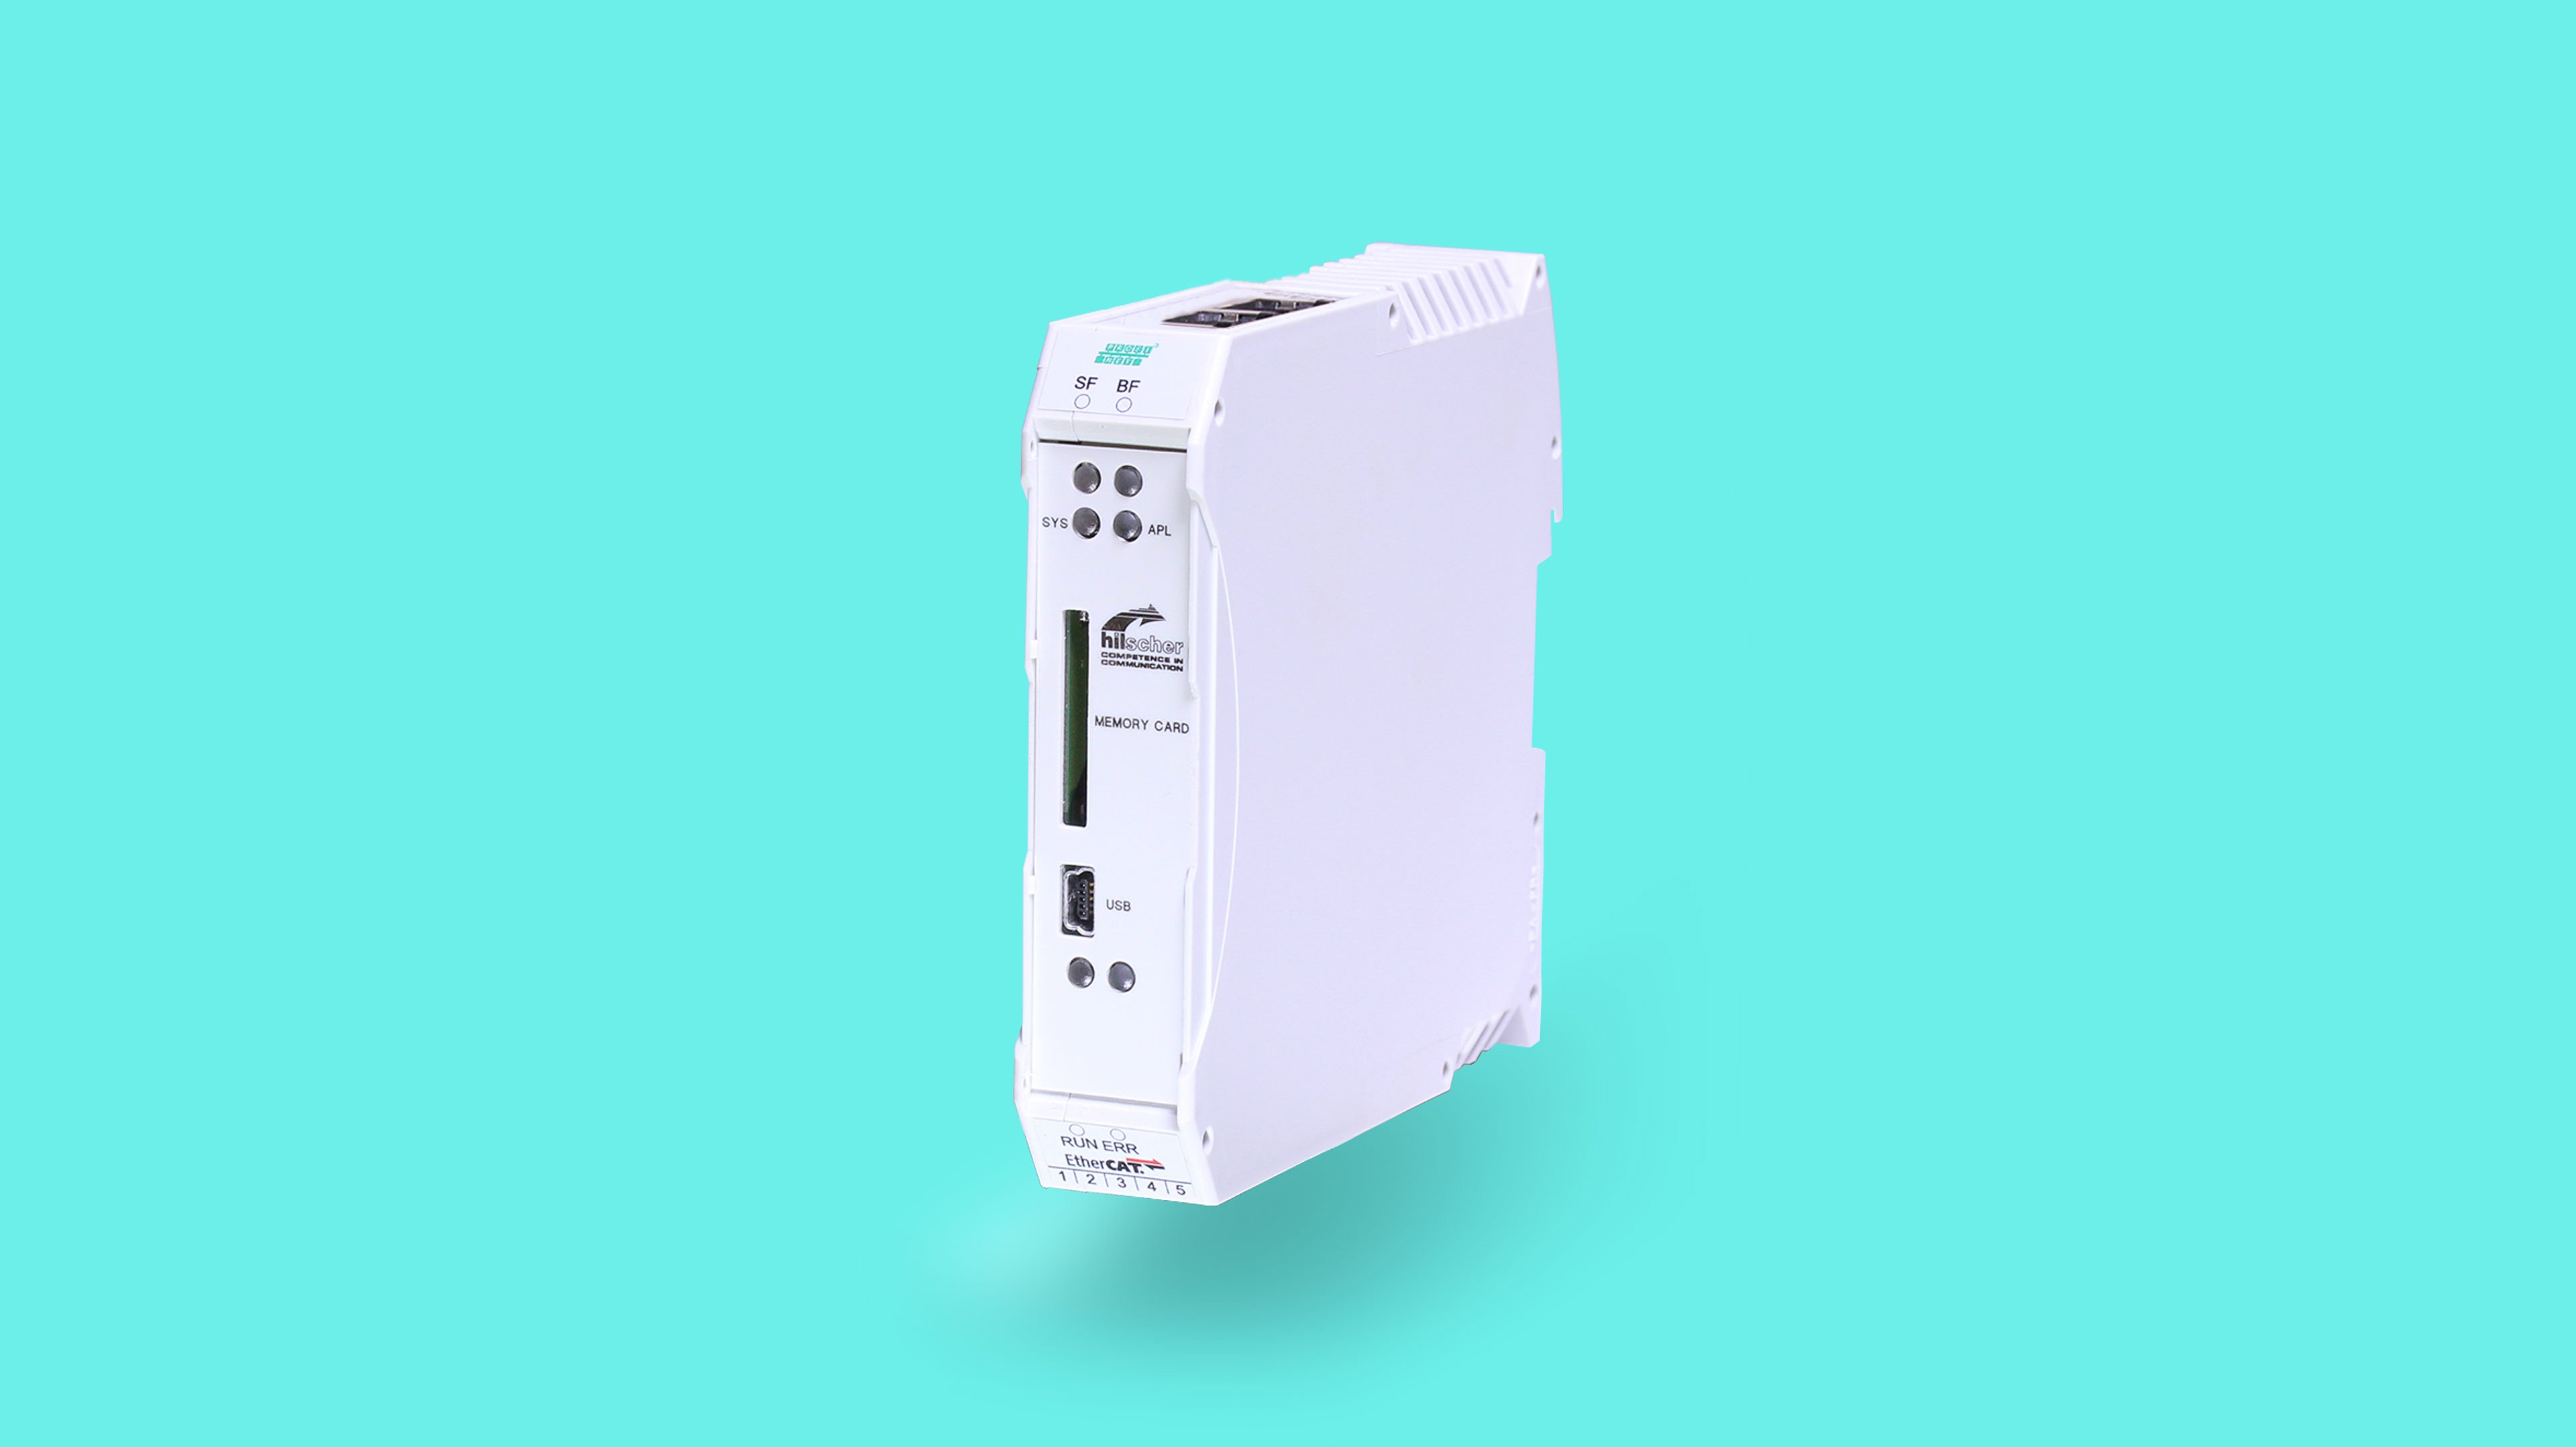 A white netTAP 151-RE-RE device on blue background.